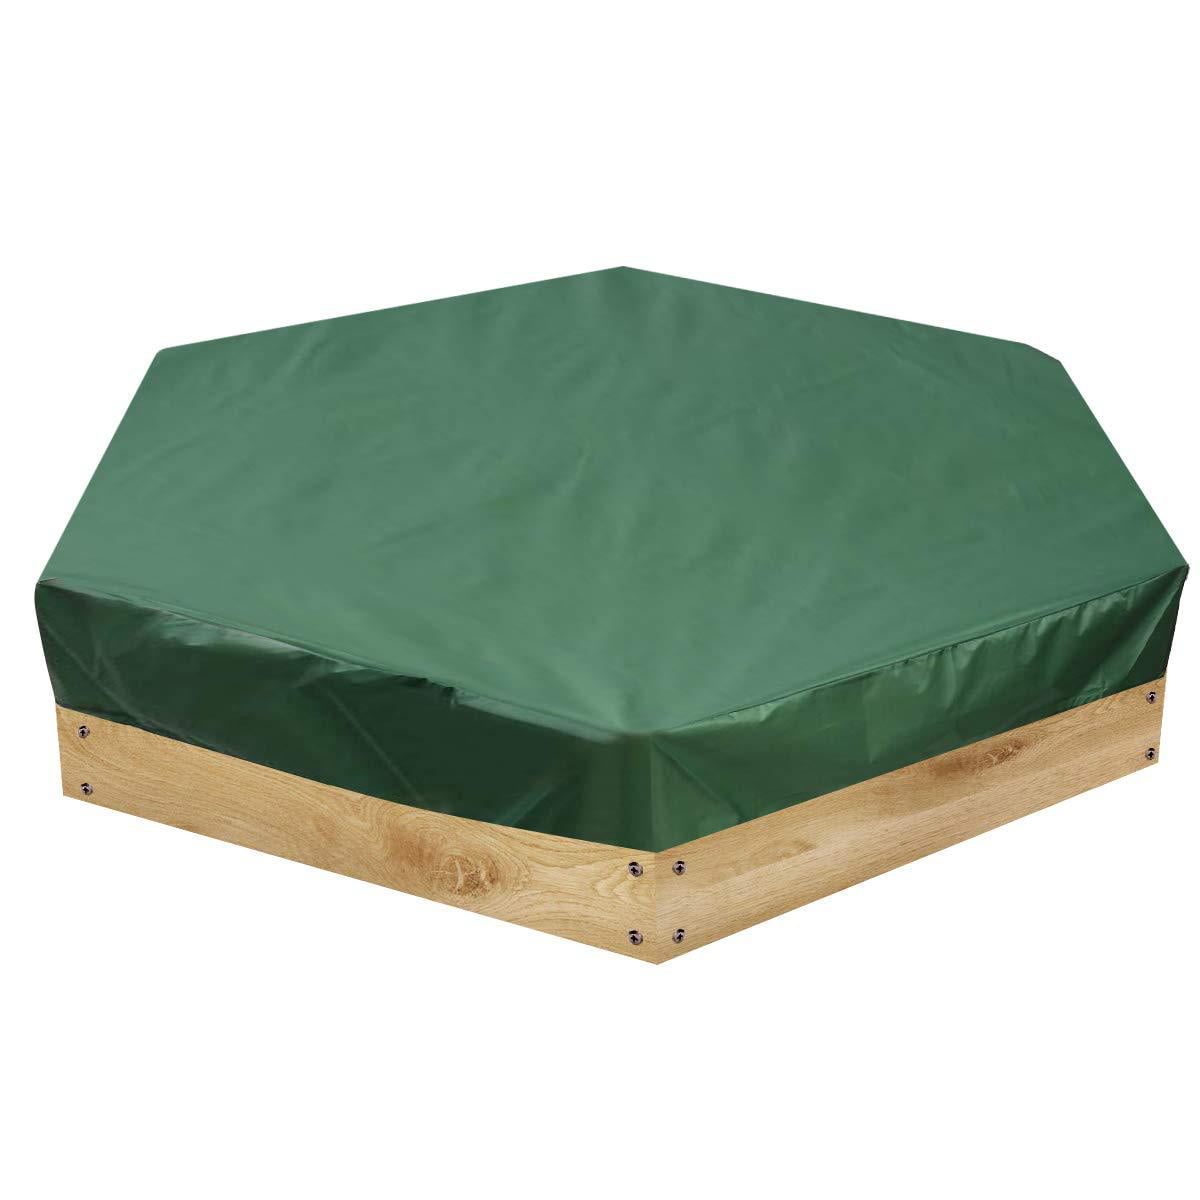 Hexagonal Sandpit Cover with Drawstring Waterproof Sandbox Cover for Garden 